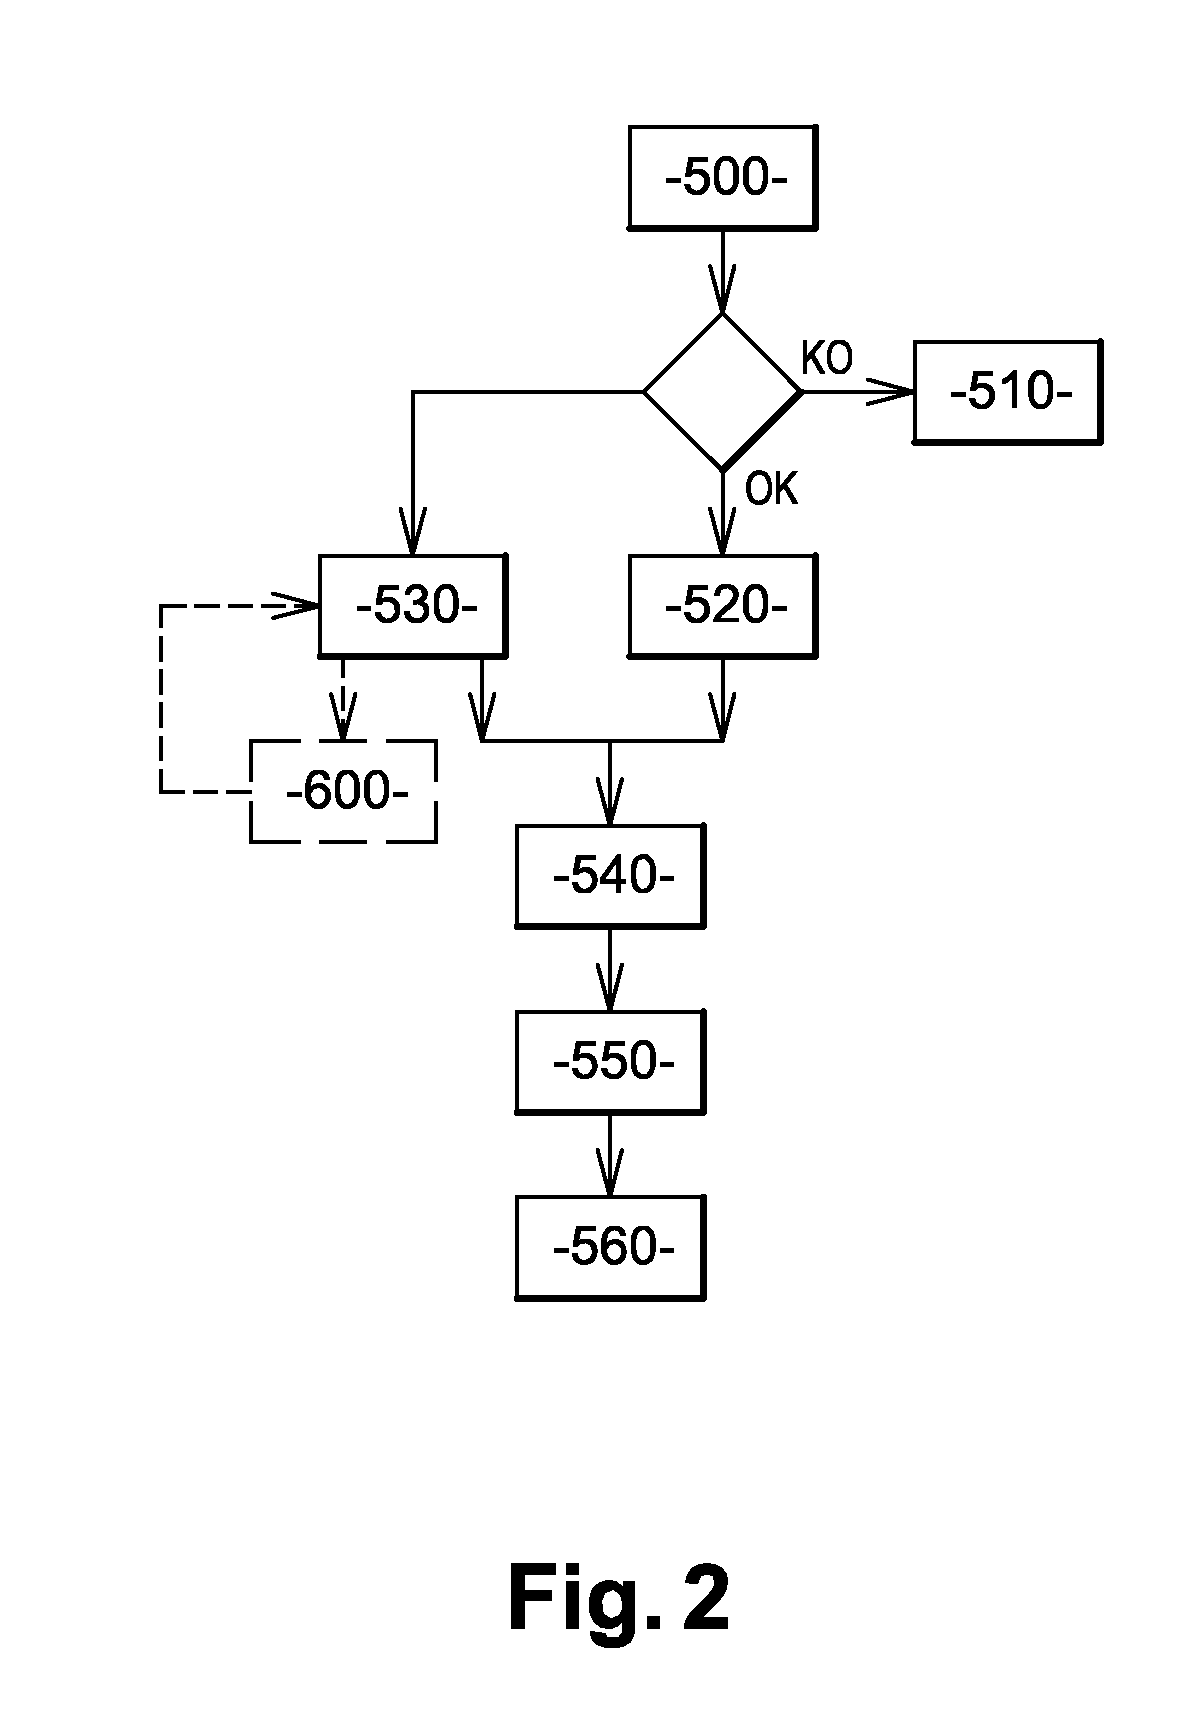 Peripheral Interface for Residential laaS